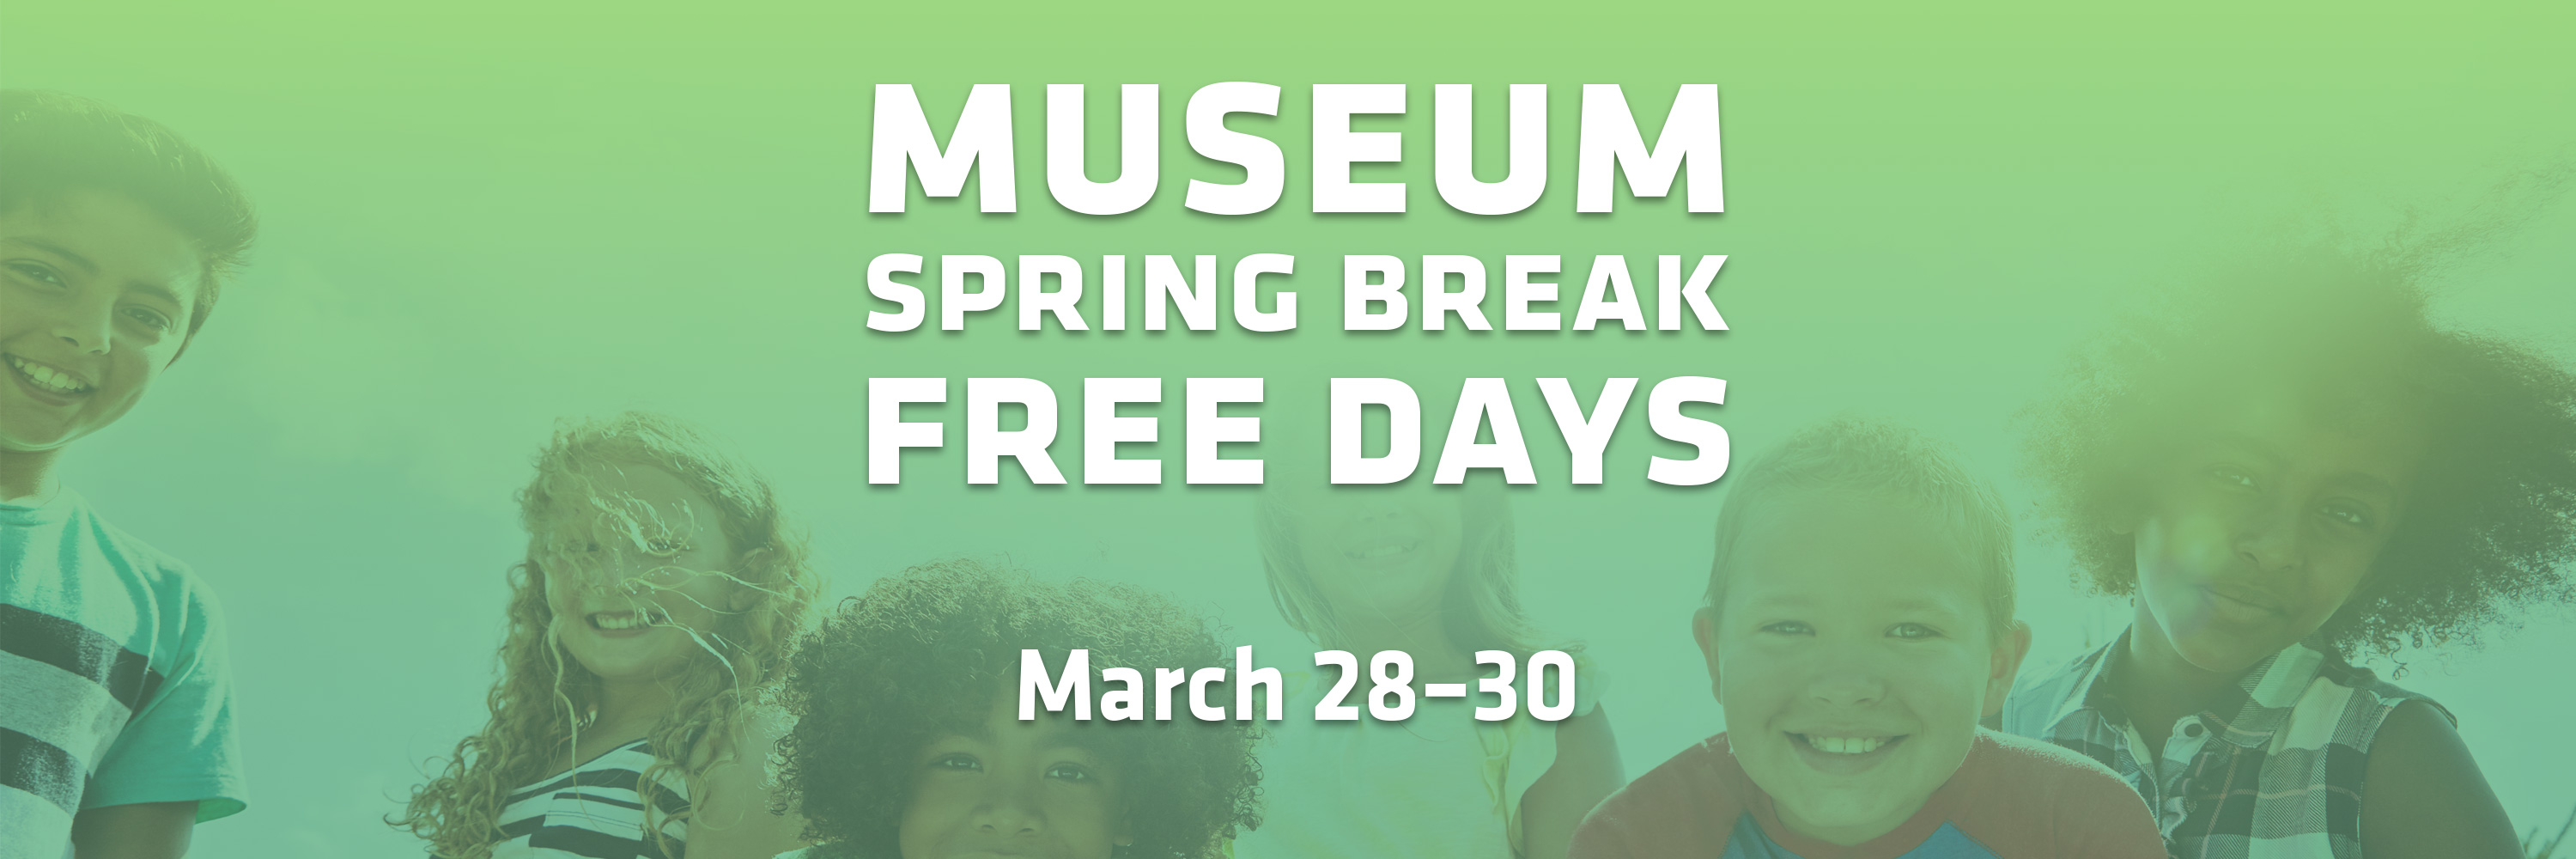 A graphic reading Museum Spring Break Free Days with dates listed as March twenty-eighth through the thirtieth